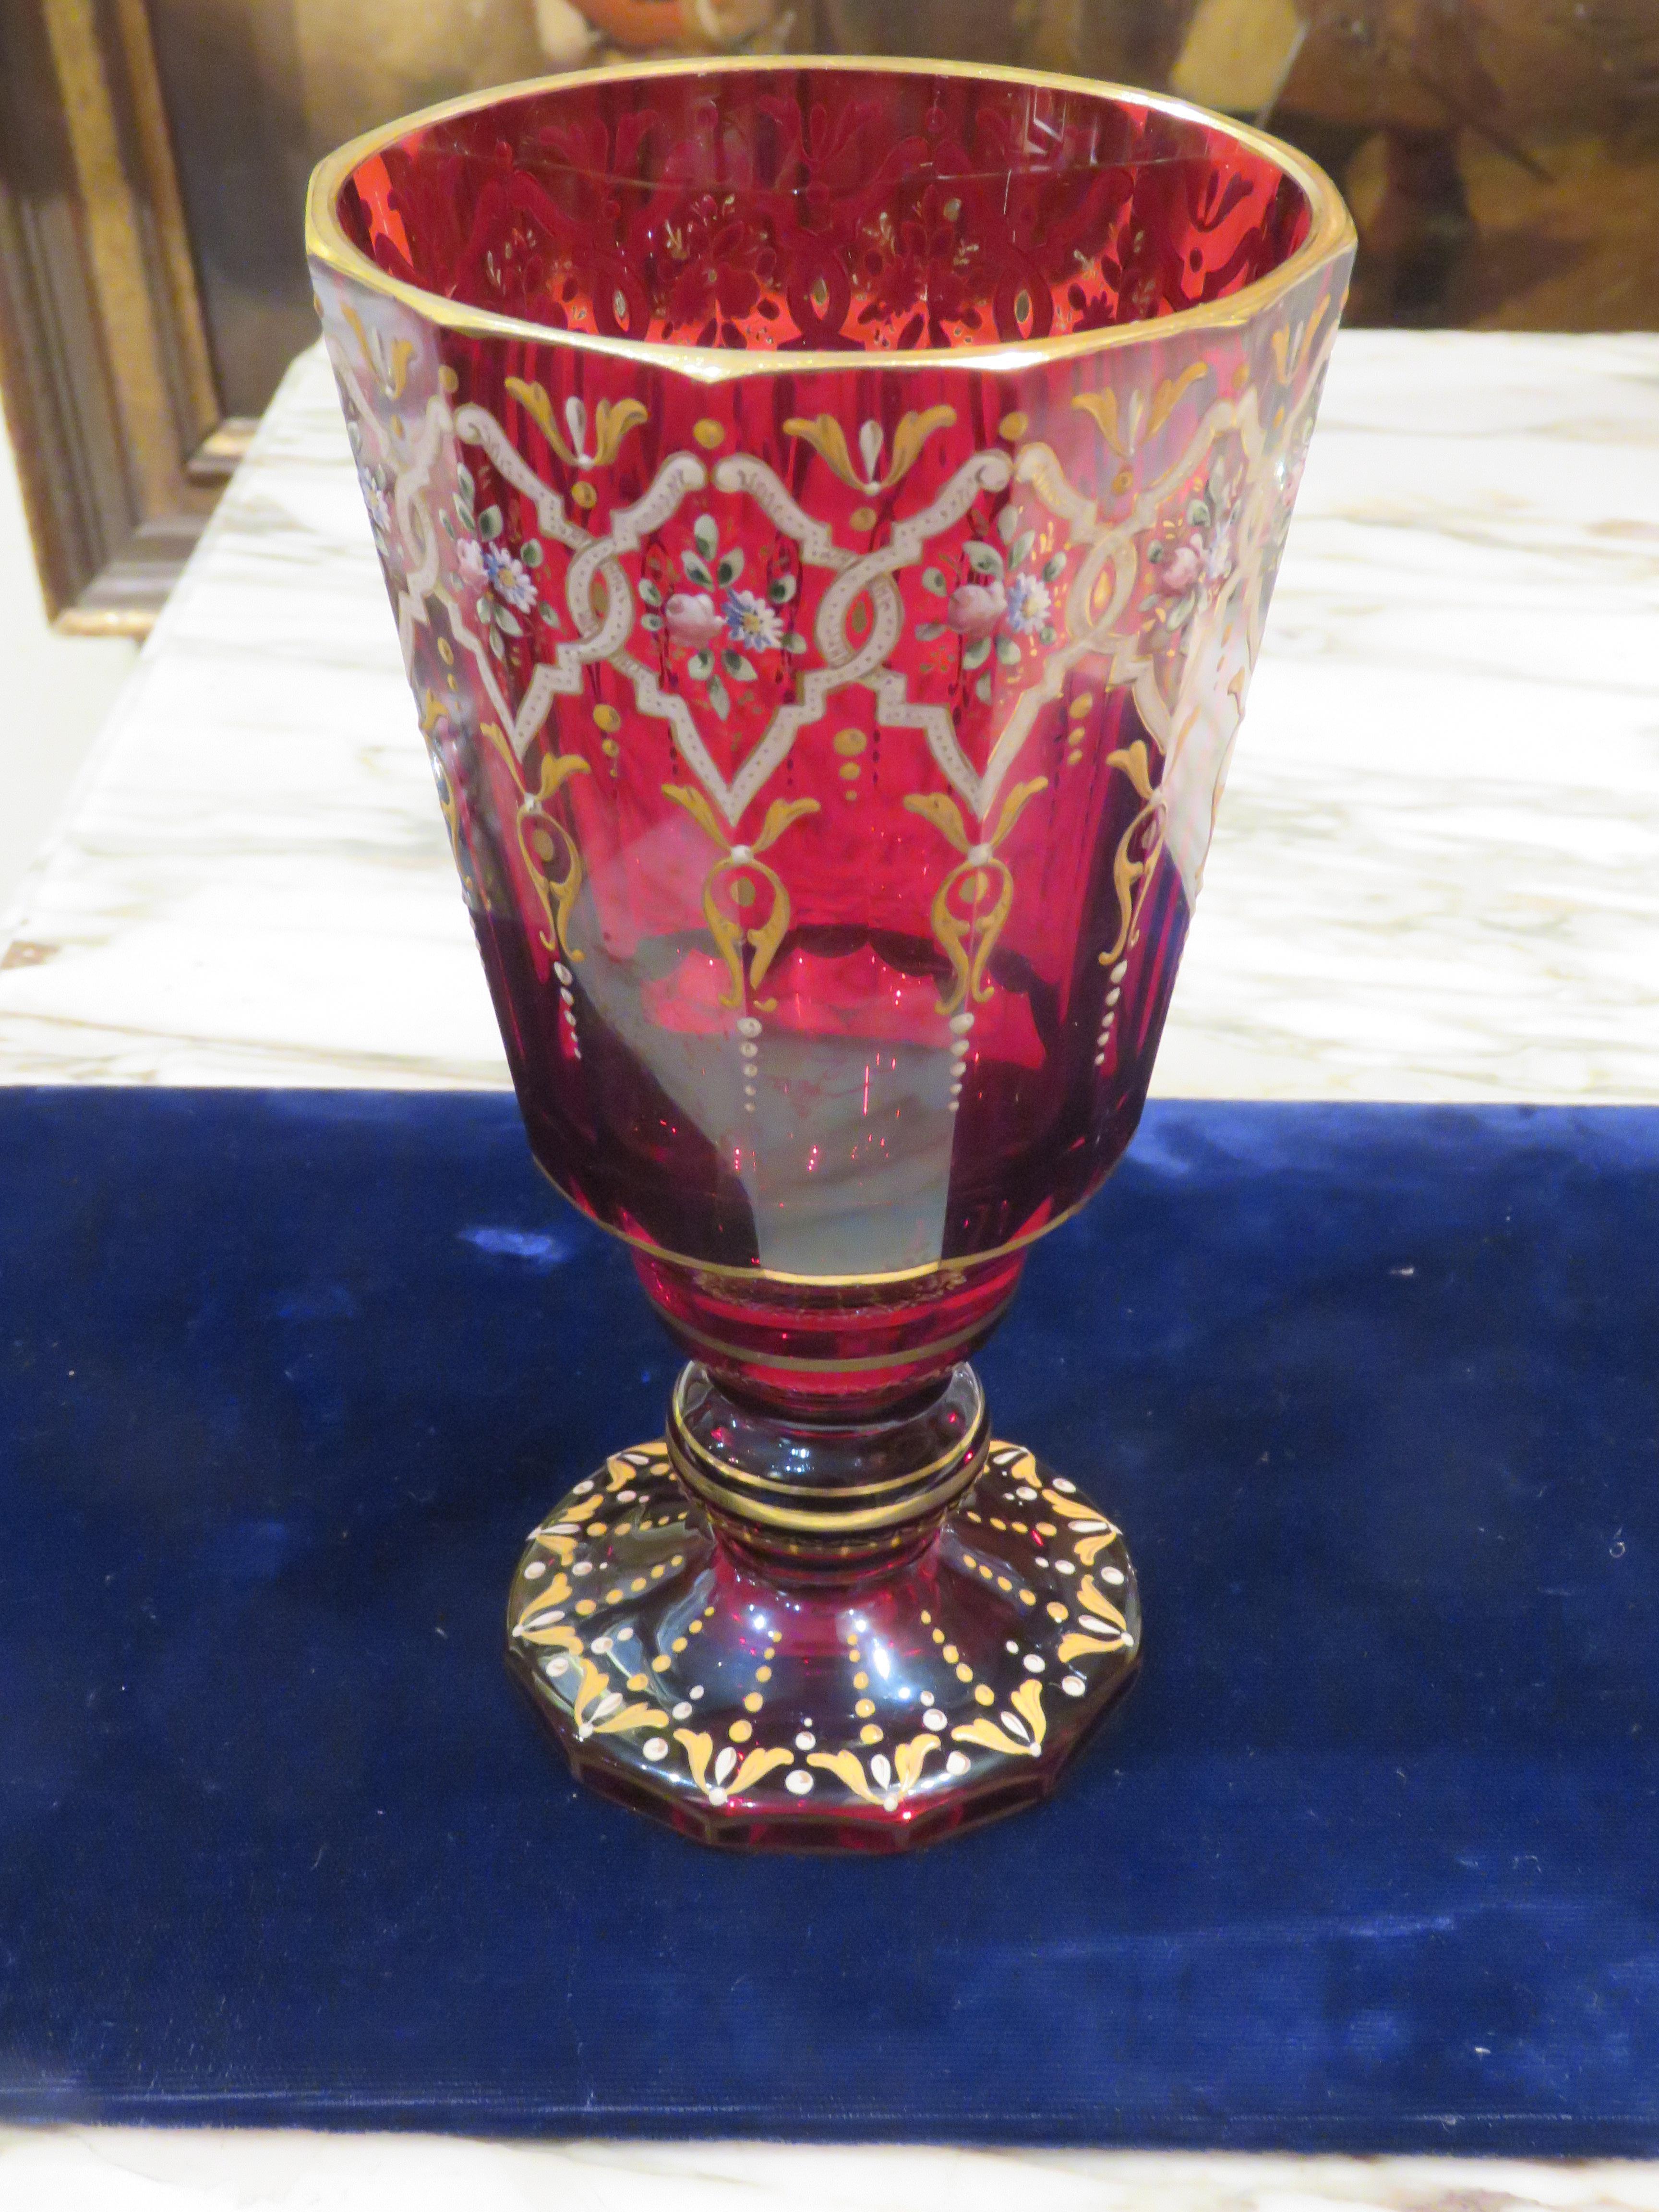 The Following Item we are Offering is A Magnificent Rare 19th Century Moser Goblet. Moser Cranberry Red Glass Goblet has geometric design in white and gold paint. The Flowers are surrounded by intertwining lines of colorful flowers and leaves. 